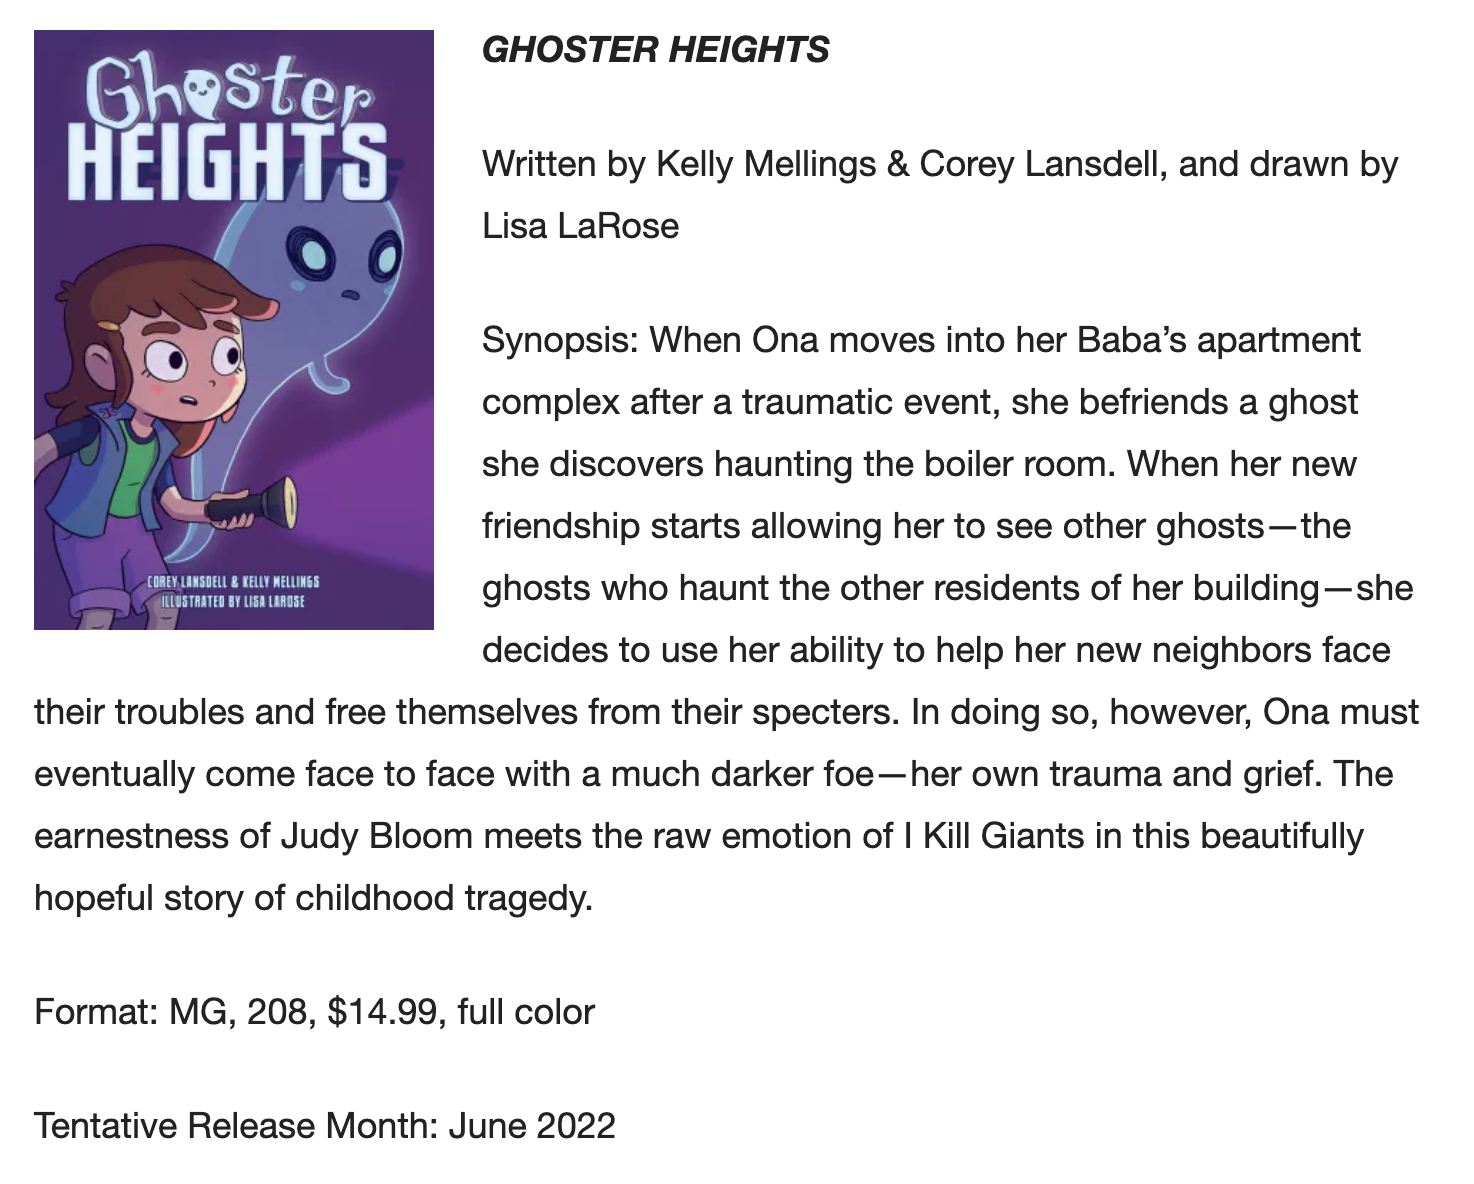 Ghoster Heights Announcement